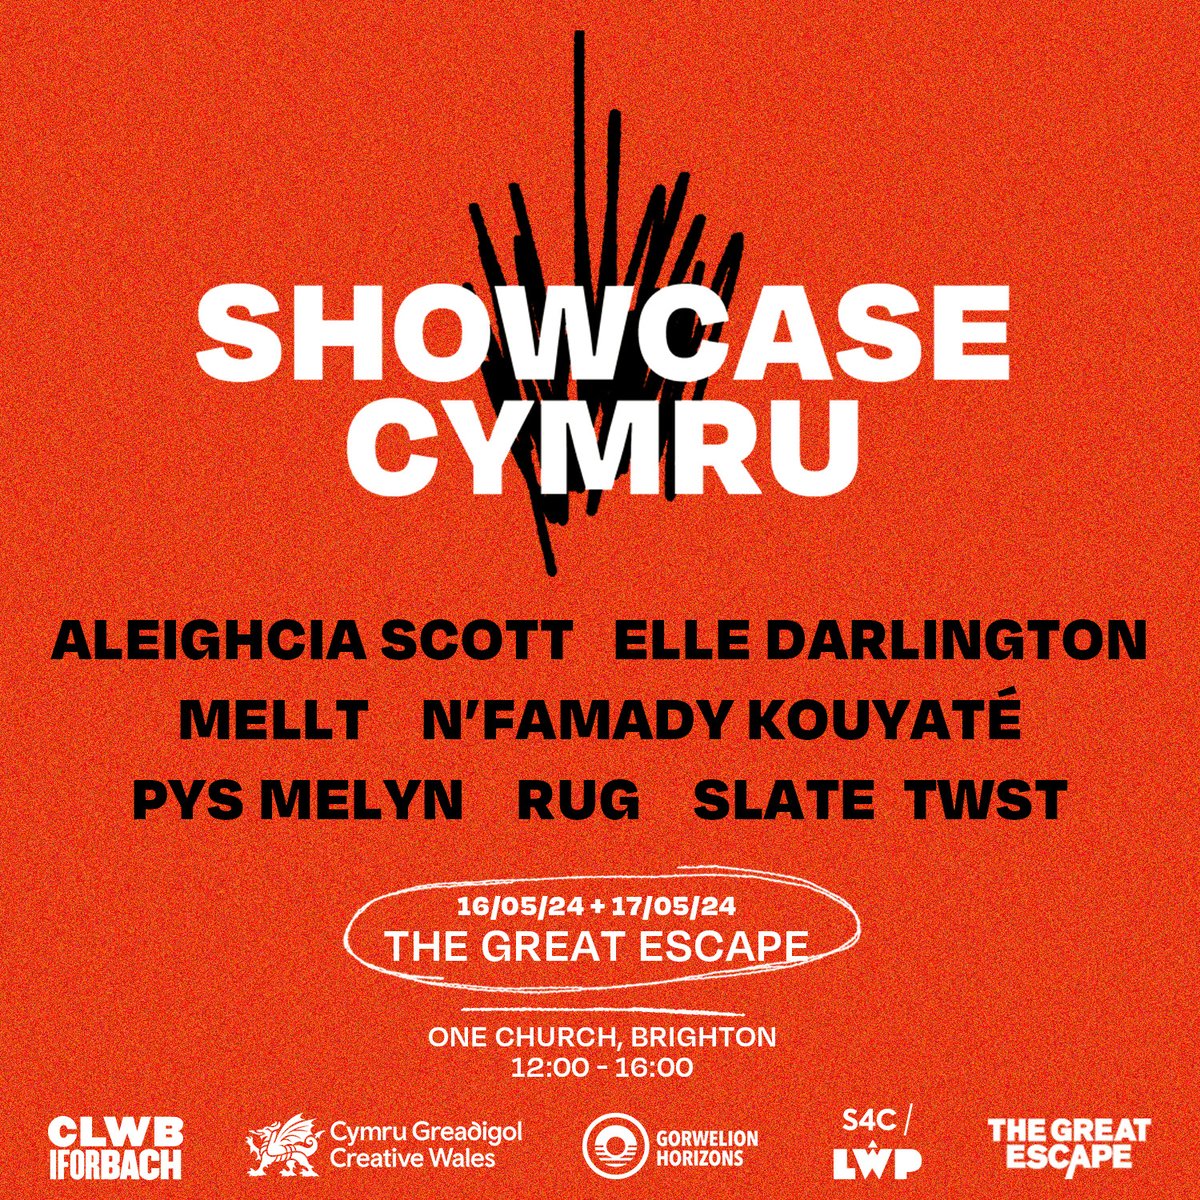 We've teamed up with @horizonscymru, @lwps4c and @cymrugreadigol to bring Showcase Cymru to @greatescapefest - highlighting the diversity and wealth of talent coming out of Wales 🏴󠁧󠁢󠁷󠁬󠁳󠁿 Showcase Cymru Takes place across two days at One Church, Brighton.